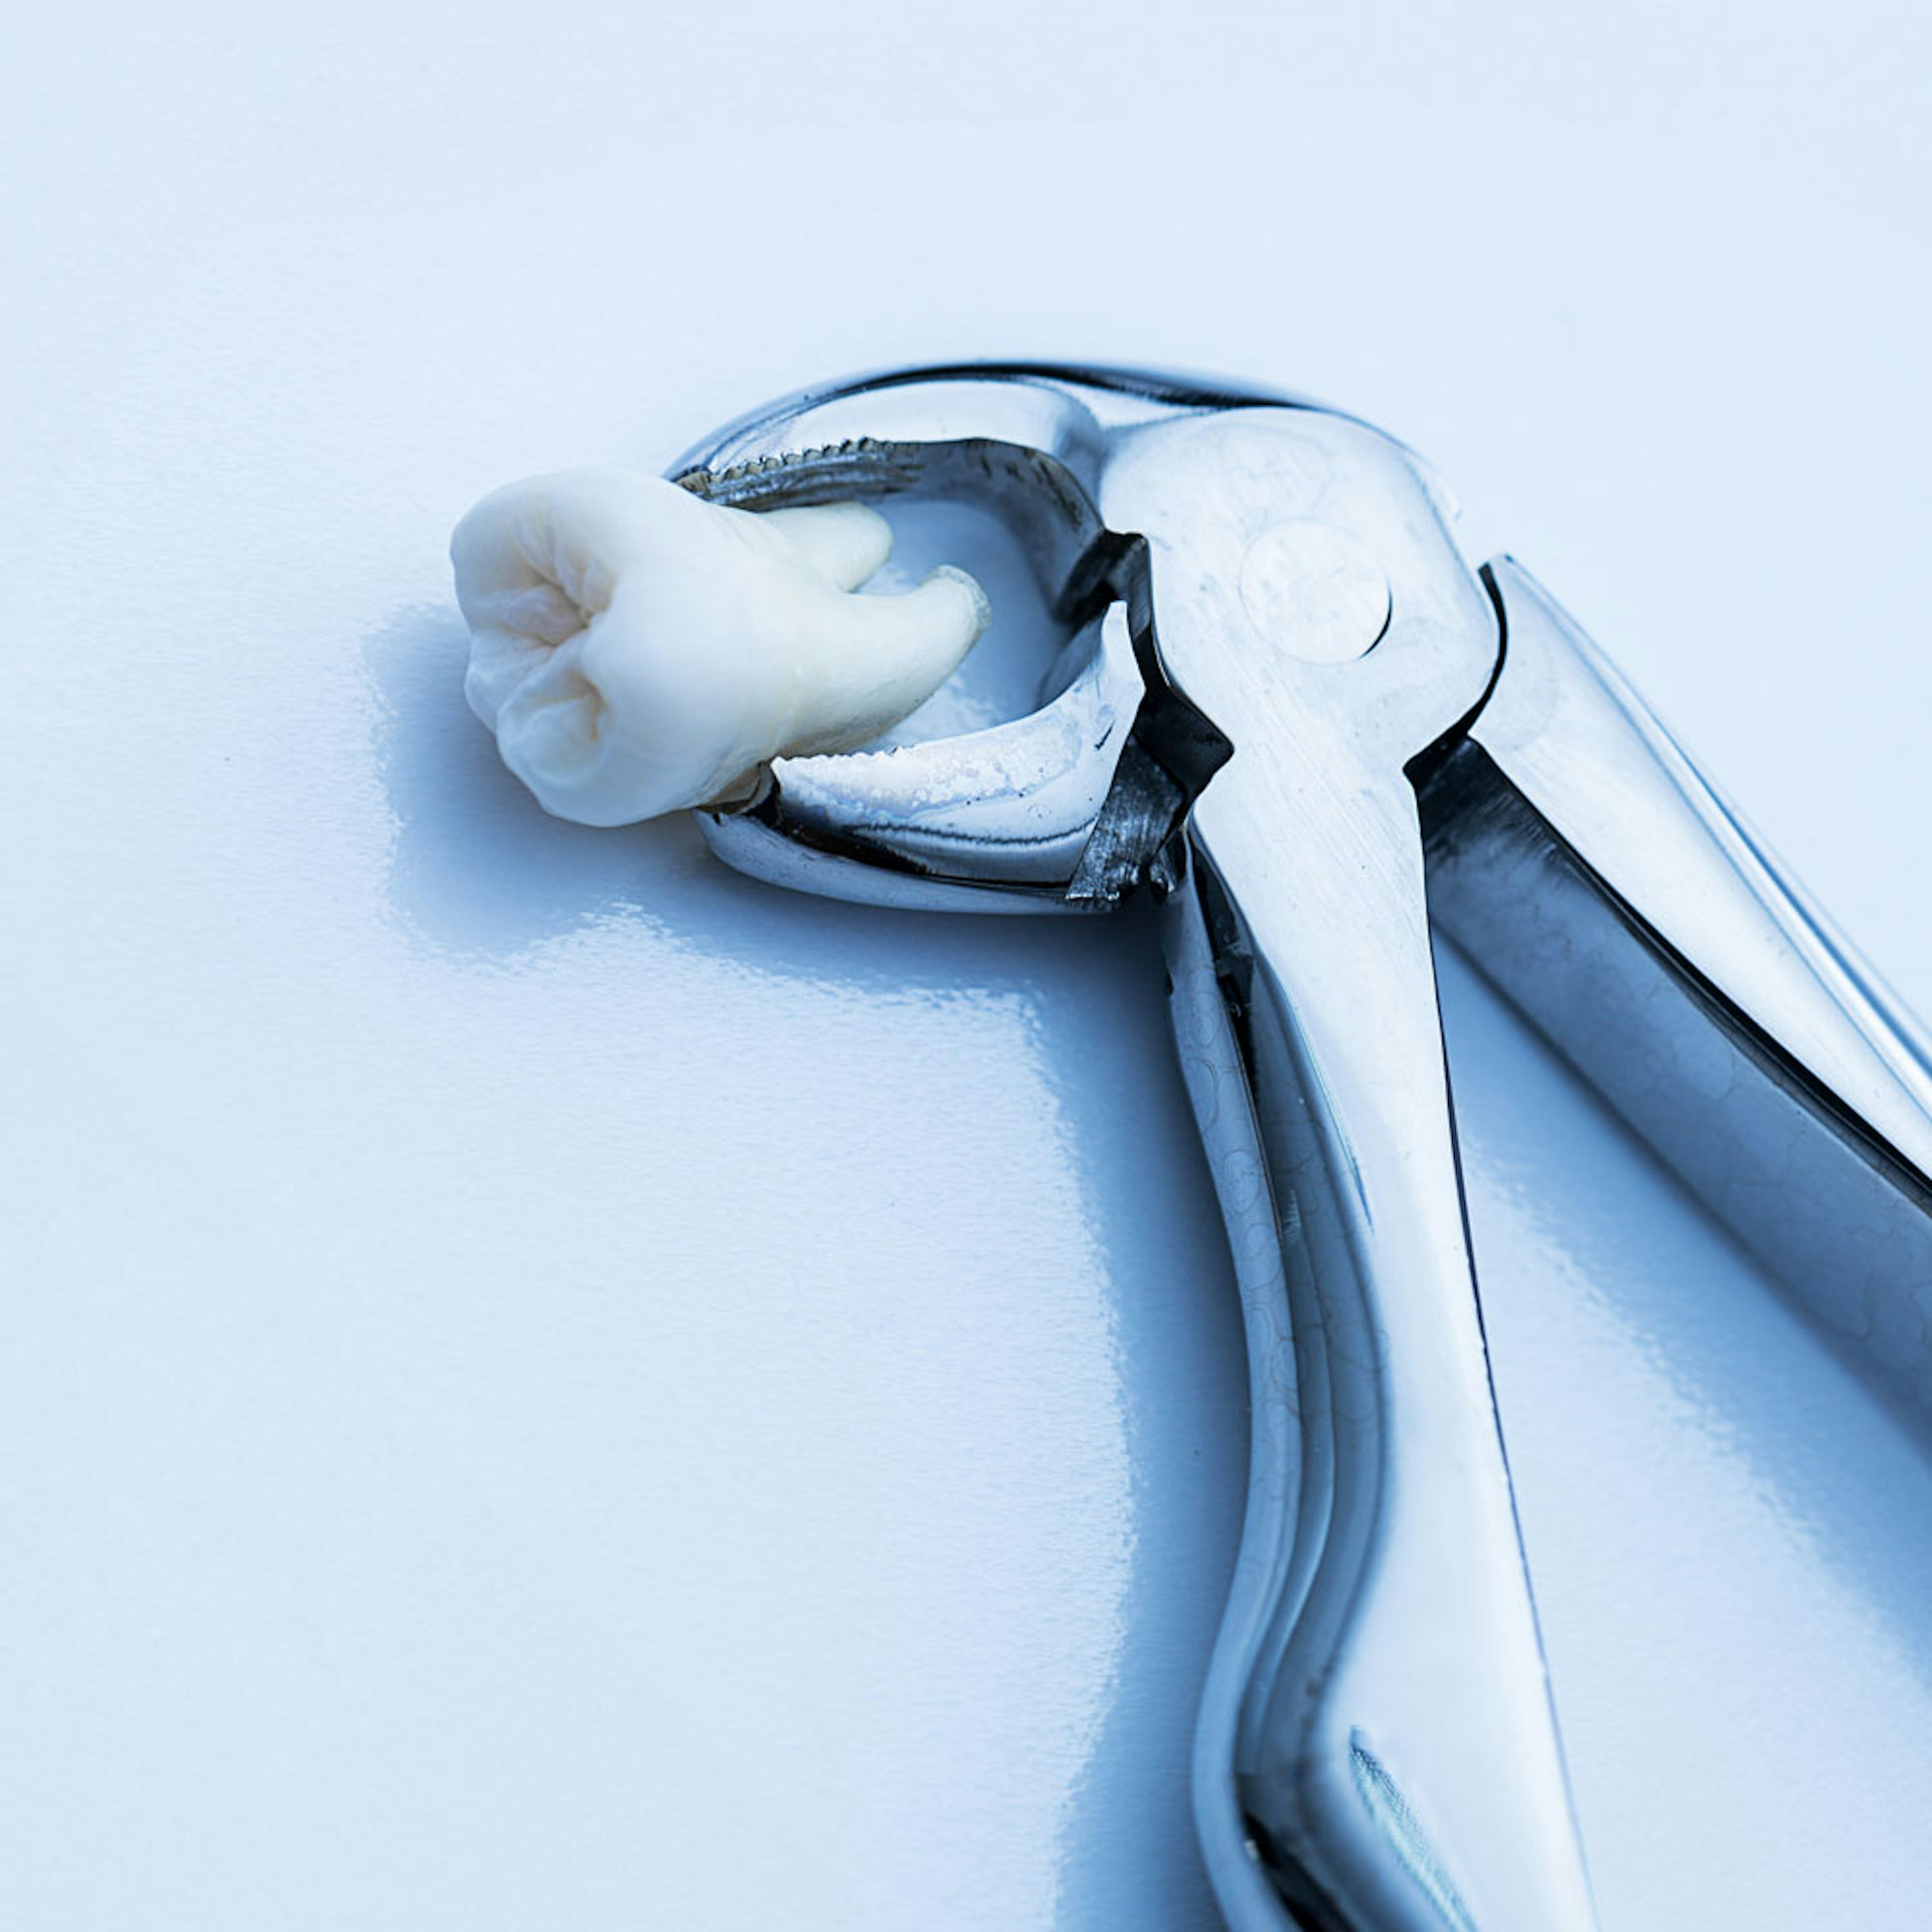 Dental tool holding tooth